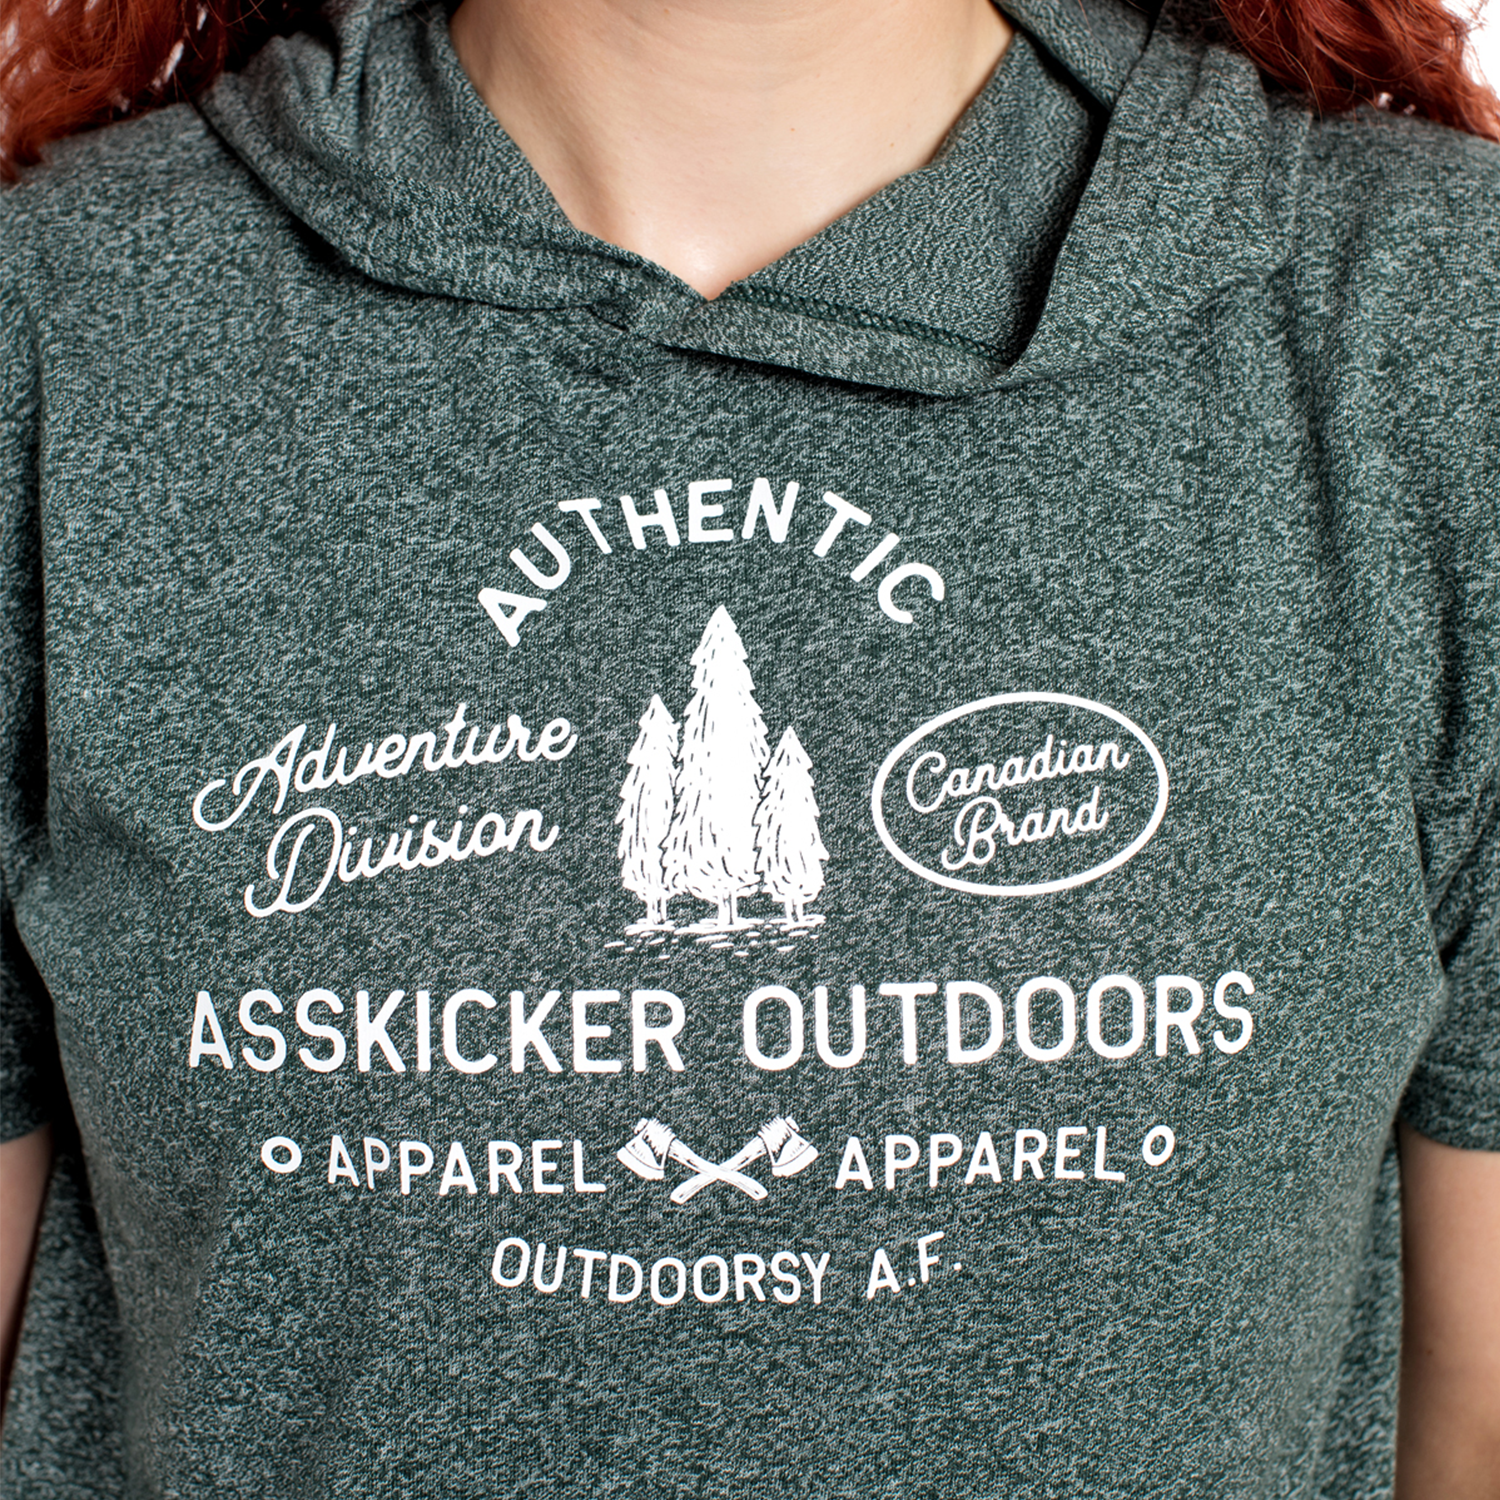 Green short sleeved hoodie for women. It feels soft and silky, with textured look that is perfect for fall. Available in sizes that range from S-3XL for women.